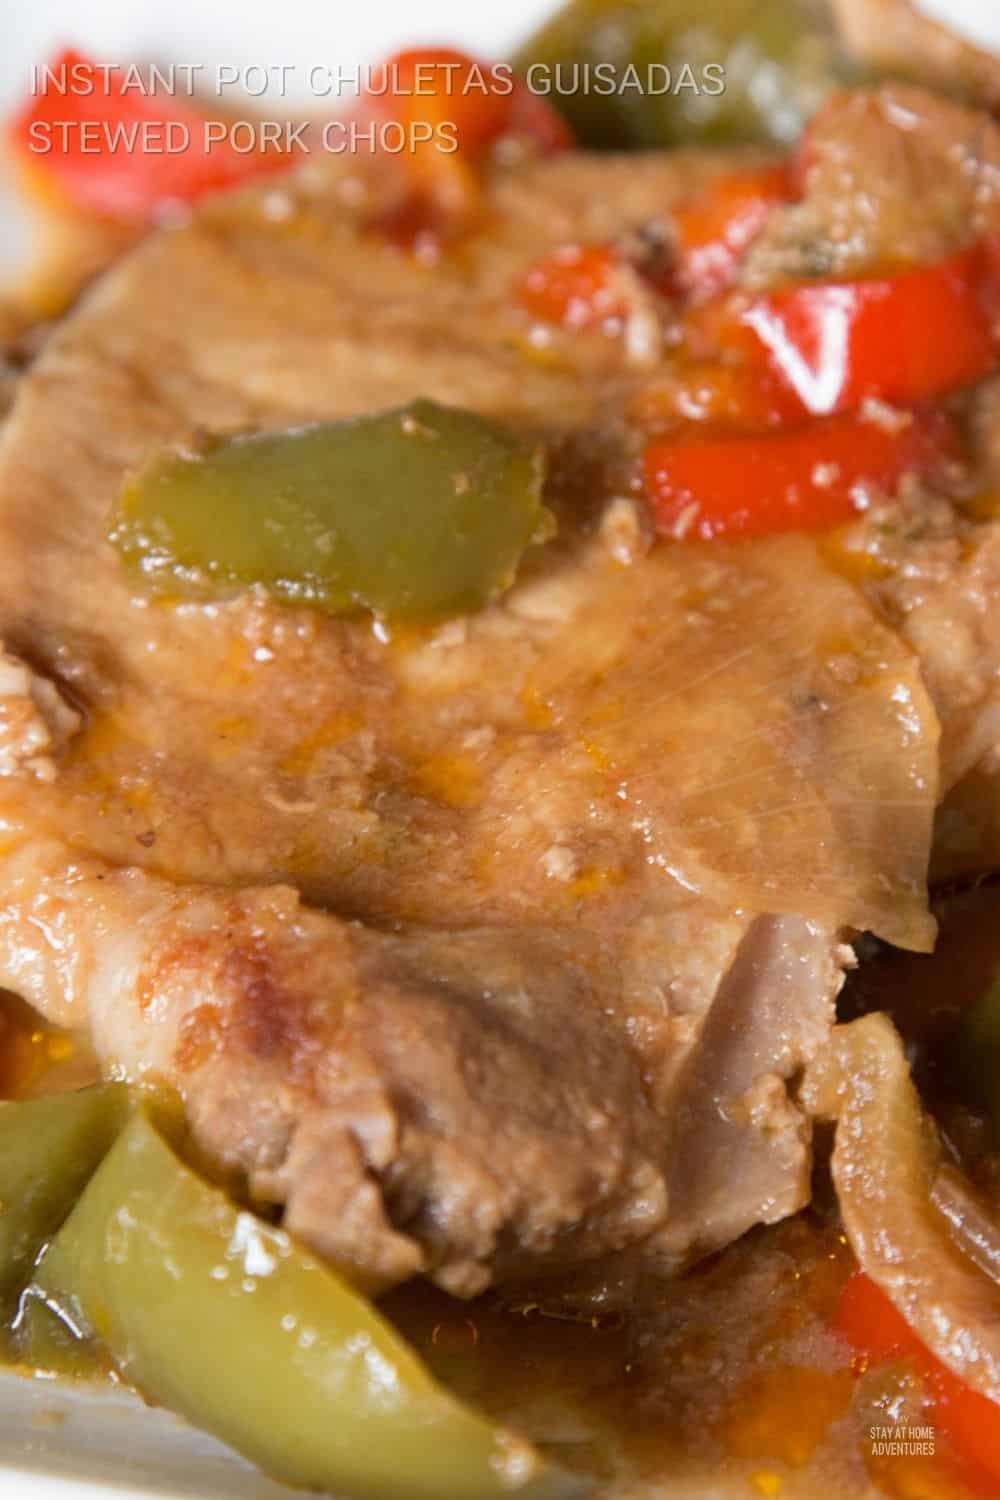 Puerto Rican food is largely influenced by African, Spanish, and French cuisines. However, with a heavy emphasis on pork dishes, Puerto Rico's most popular dish is Chuletas Guisadas. This stewed pork chops dish can vary in taste from soup to dry with more or less sauce depending on the region of Puerto Rico where you are eating it. It typically has vegetables such as bell peppers, onion, garlic cloves, and tomato sauce that cook down into a thick gravy for the meat to simmer until tender while rice cooks separately. via @mystayathome